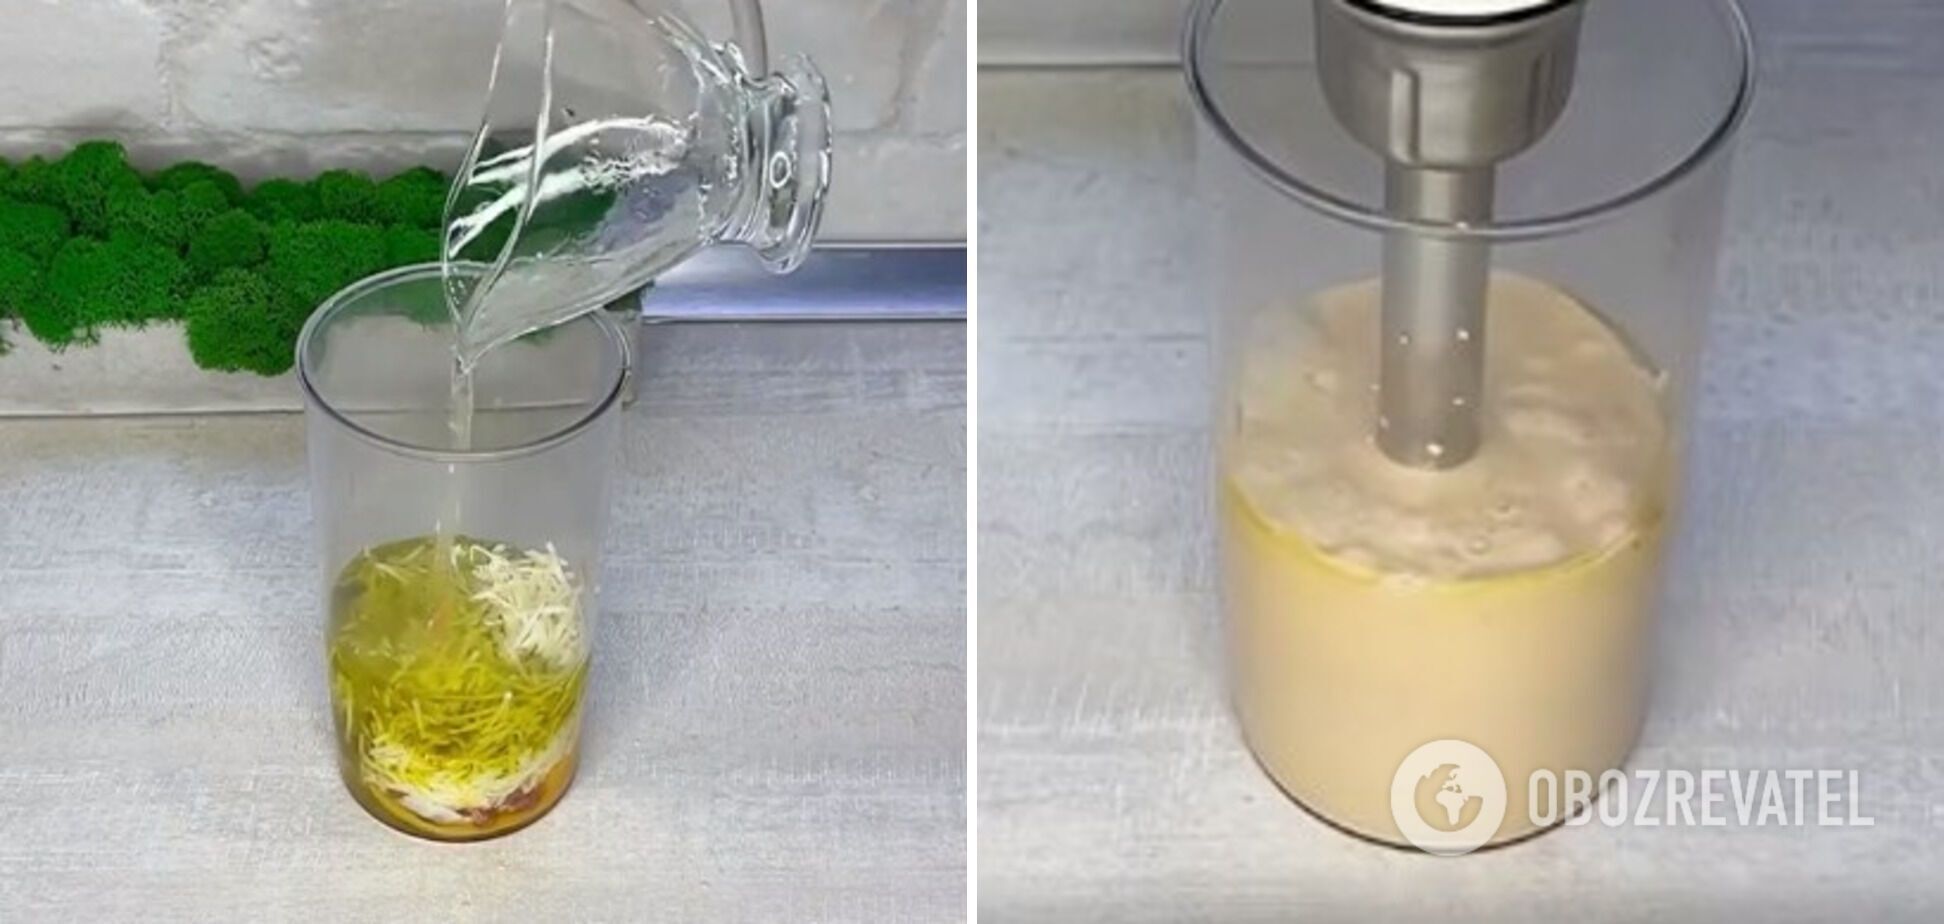 How to prepare mayonnaise properly